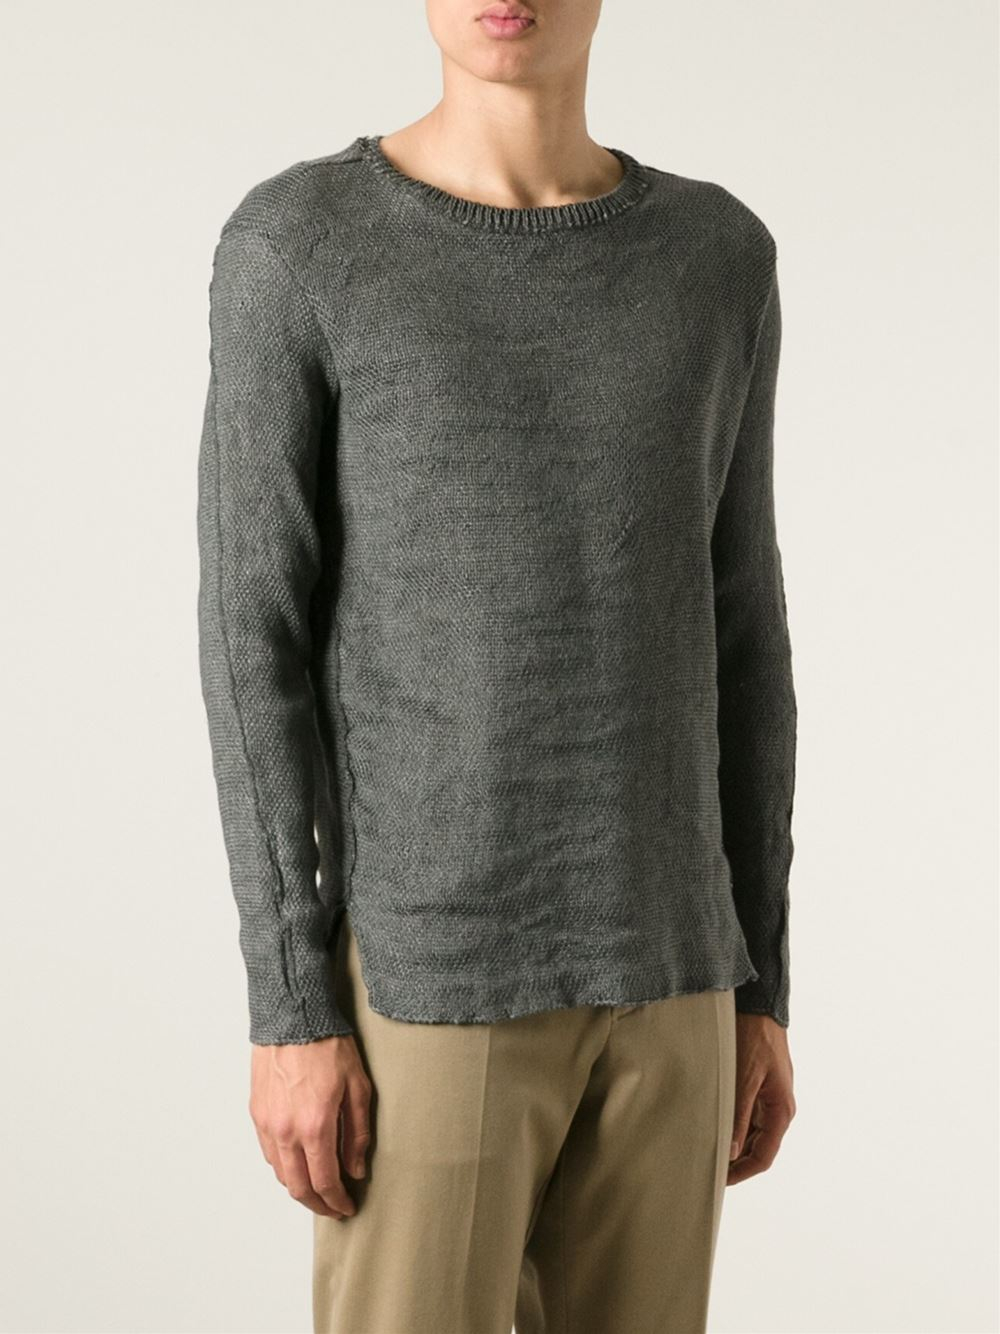 Lyst - Transit Round Neck Sweater in Gray for Men